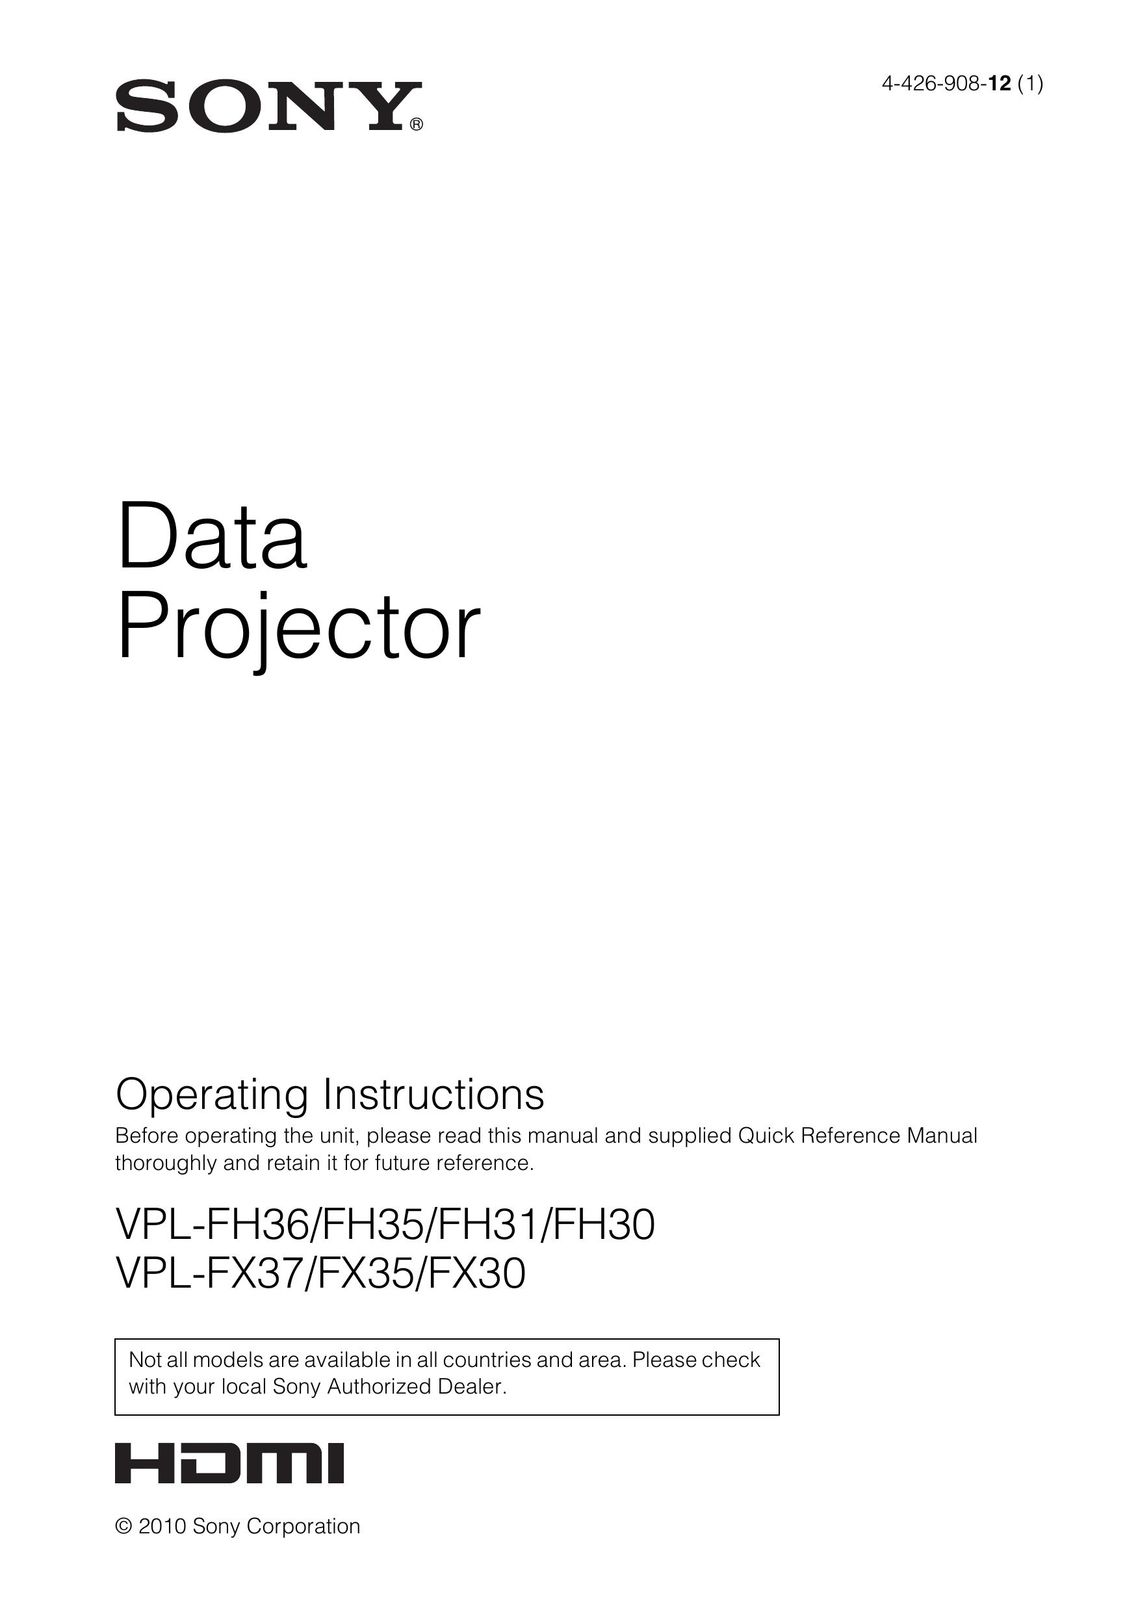 Sony FX30 Projector User Manual